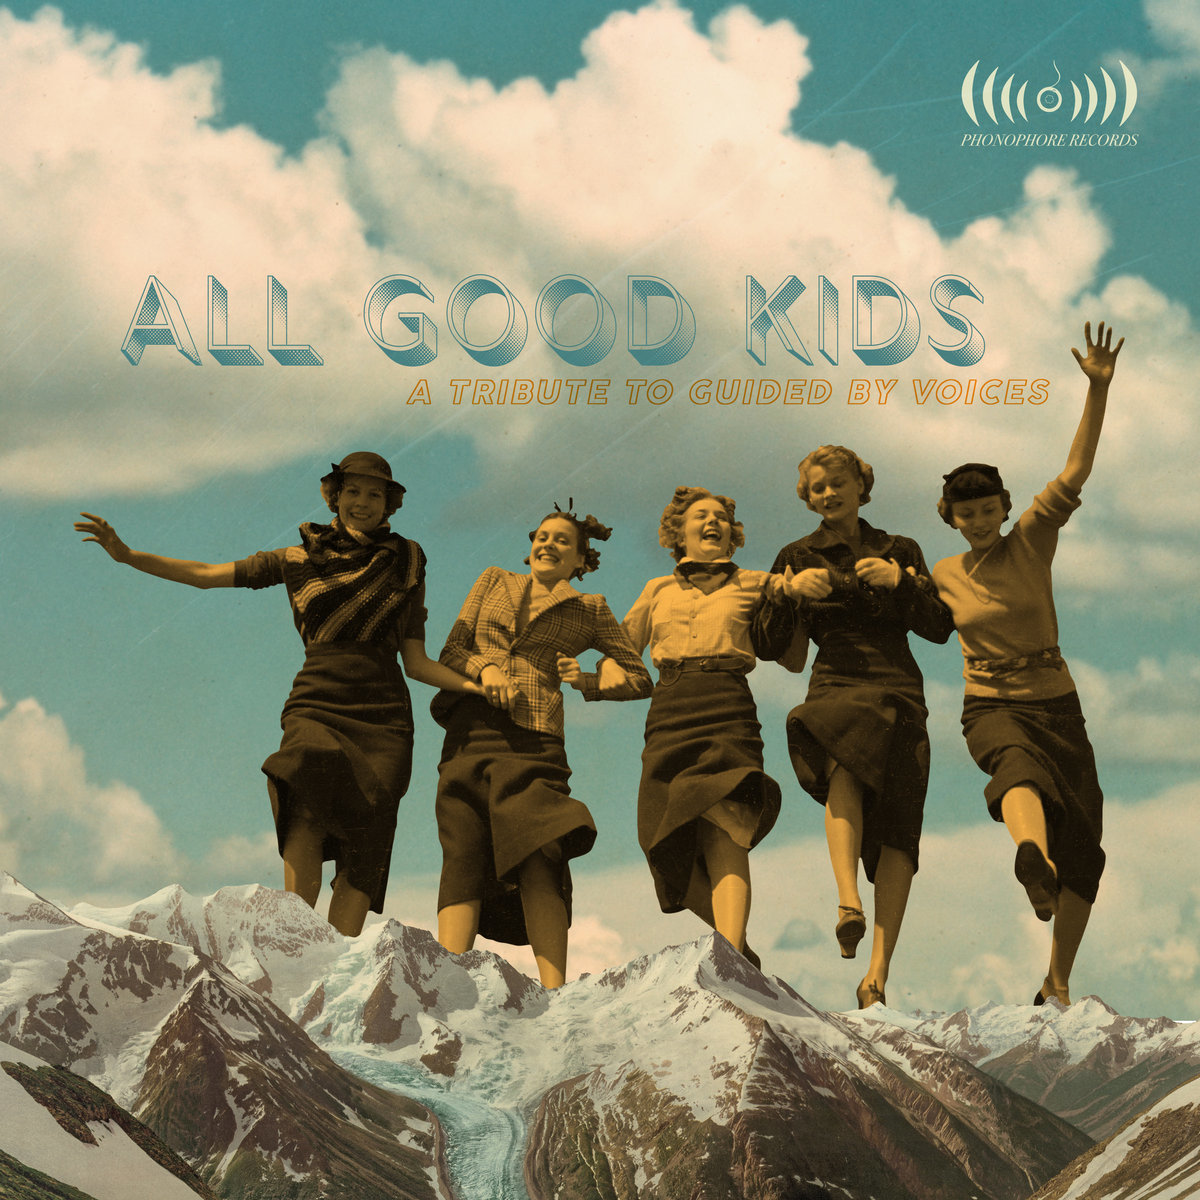 Cover art for “All Good Kids - A Tribute to Guided By Voices.”